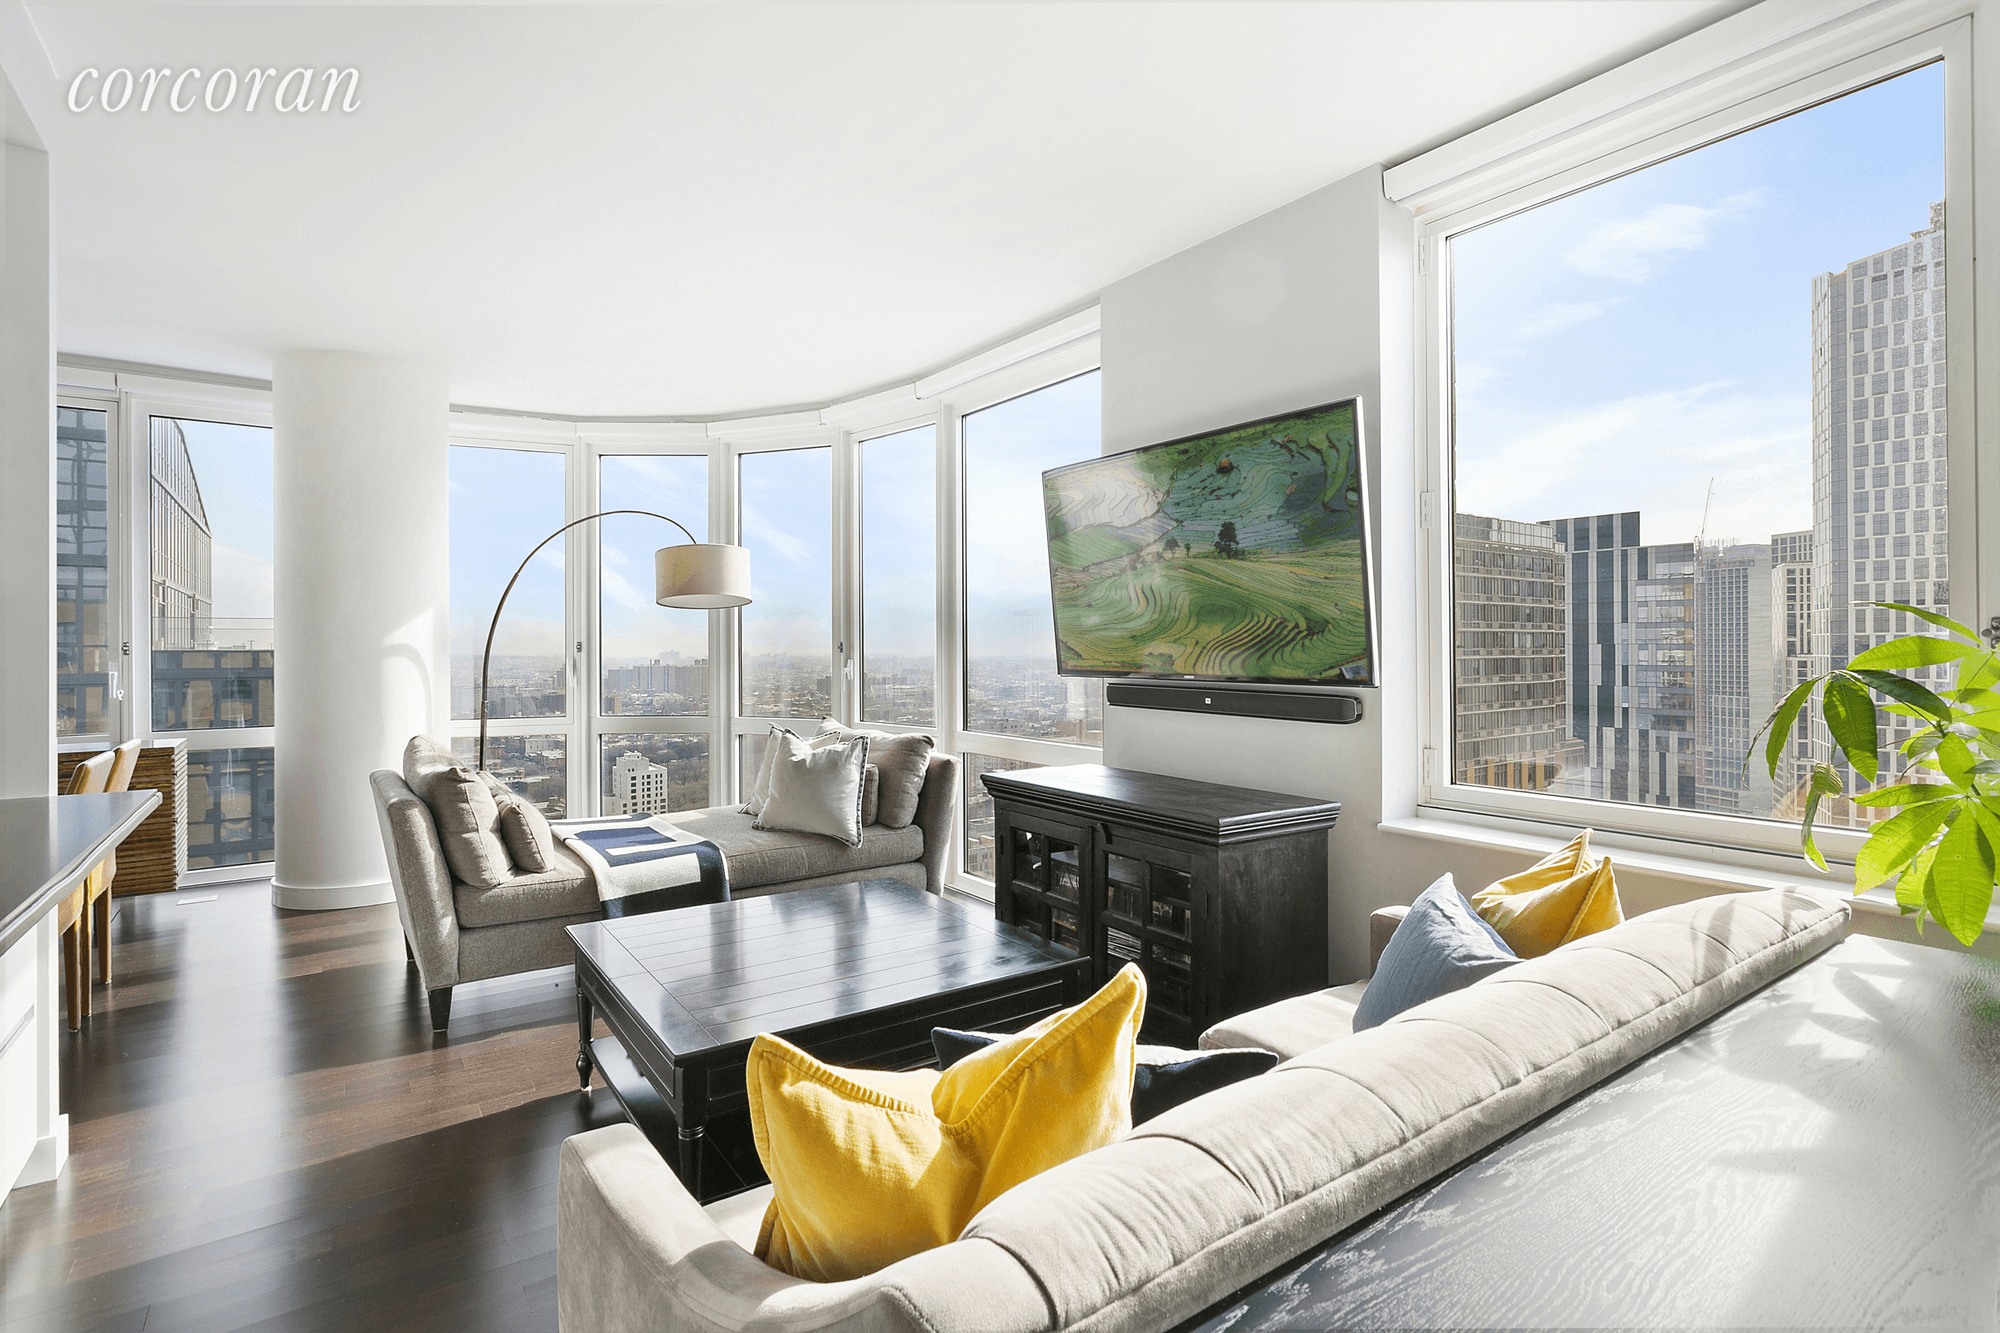 38C at Oro offers the very best confluence of space, light, views and value in this sought after Downtown Brooklyn condominium.